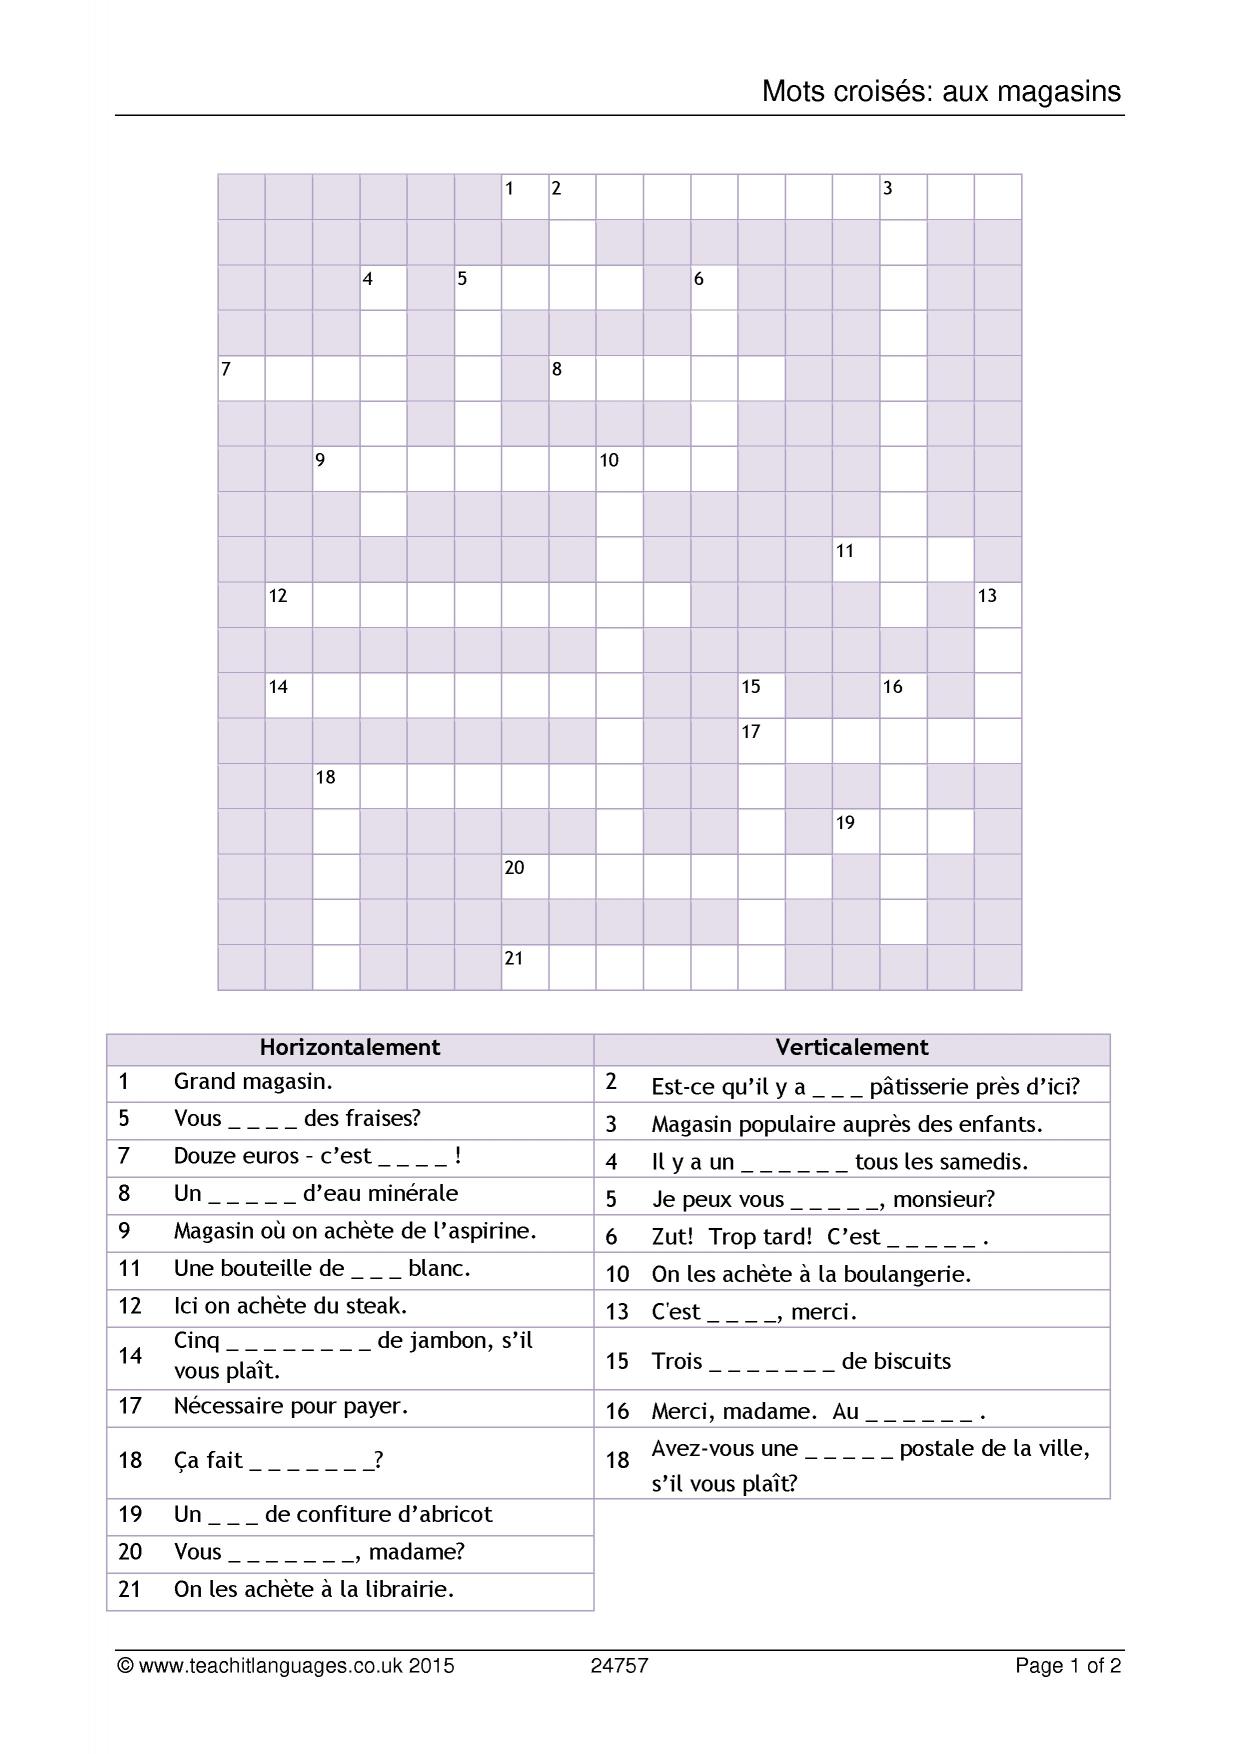 Crossword puzzle | Shopping | KS3 French teaching resource